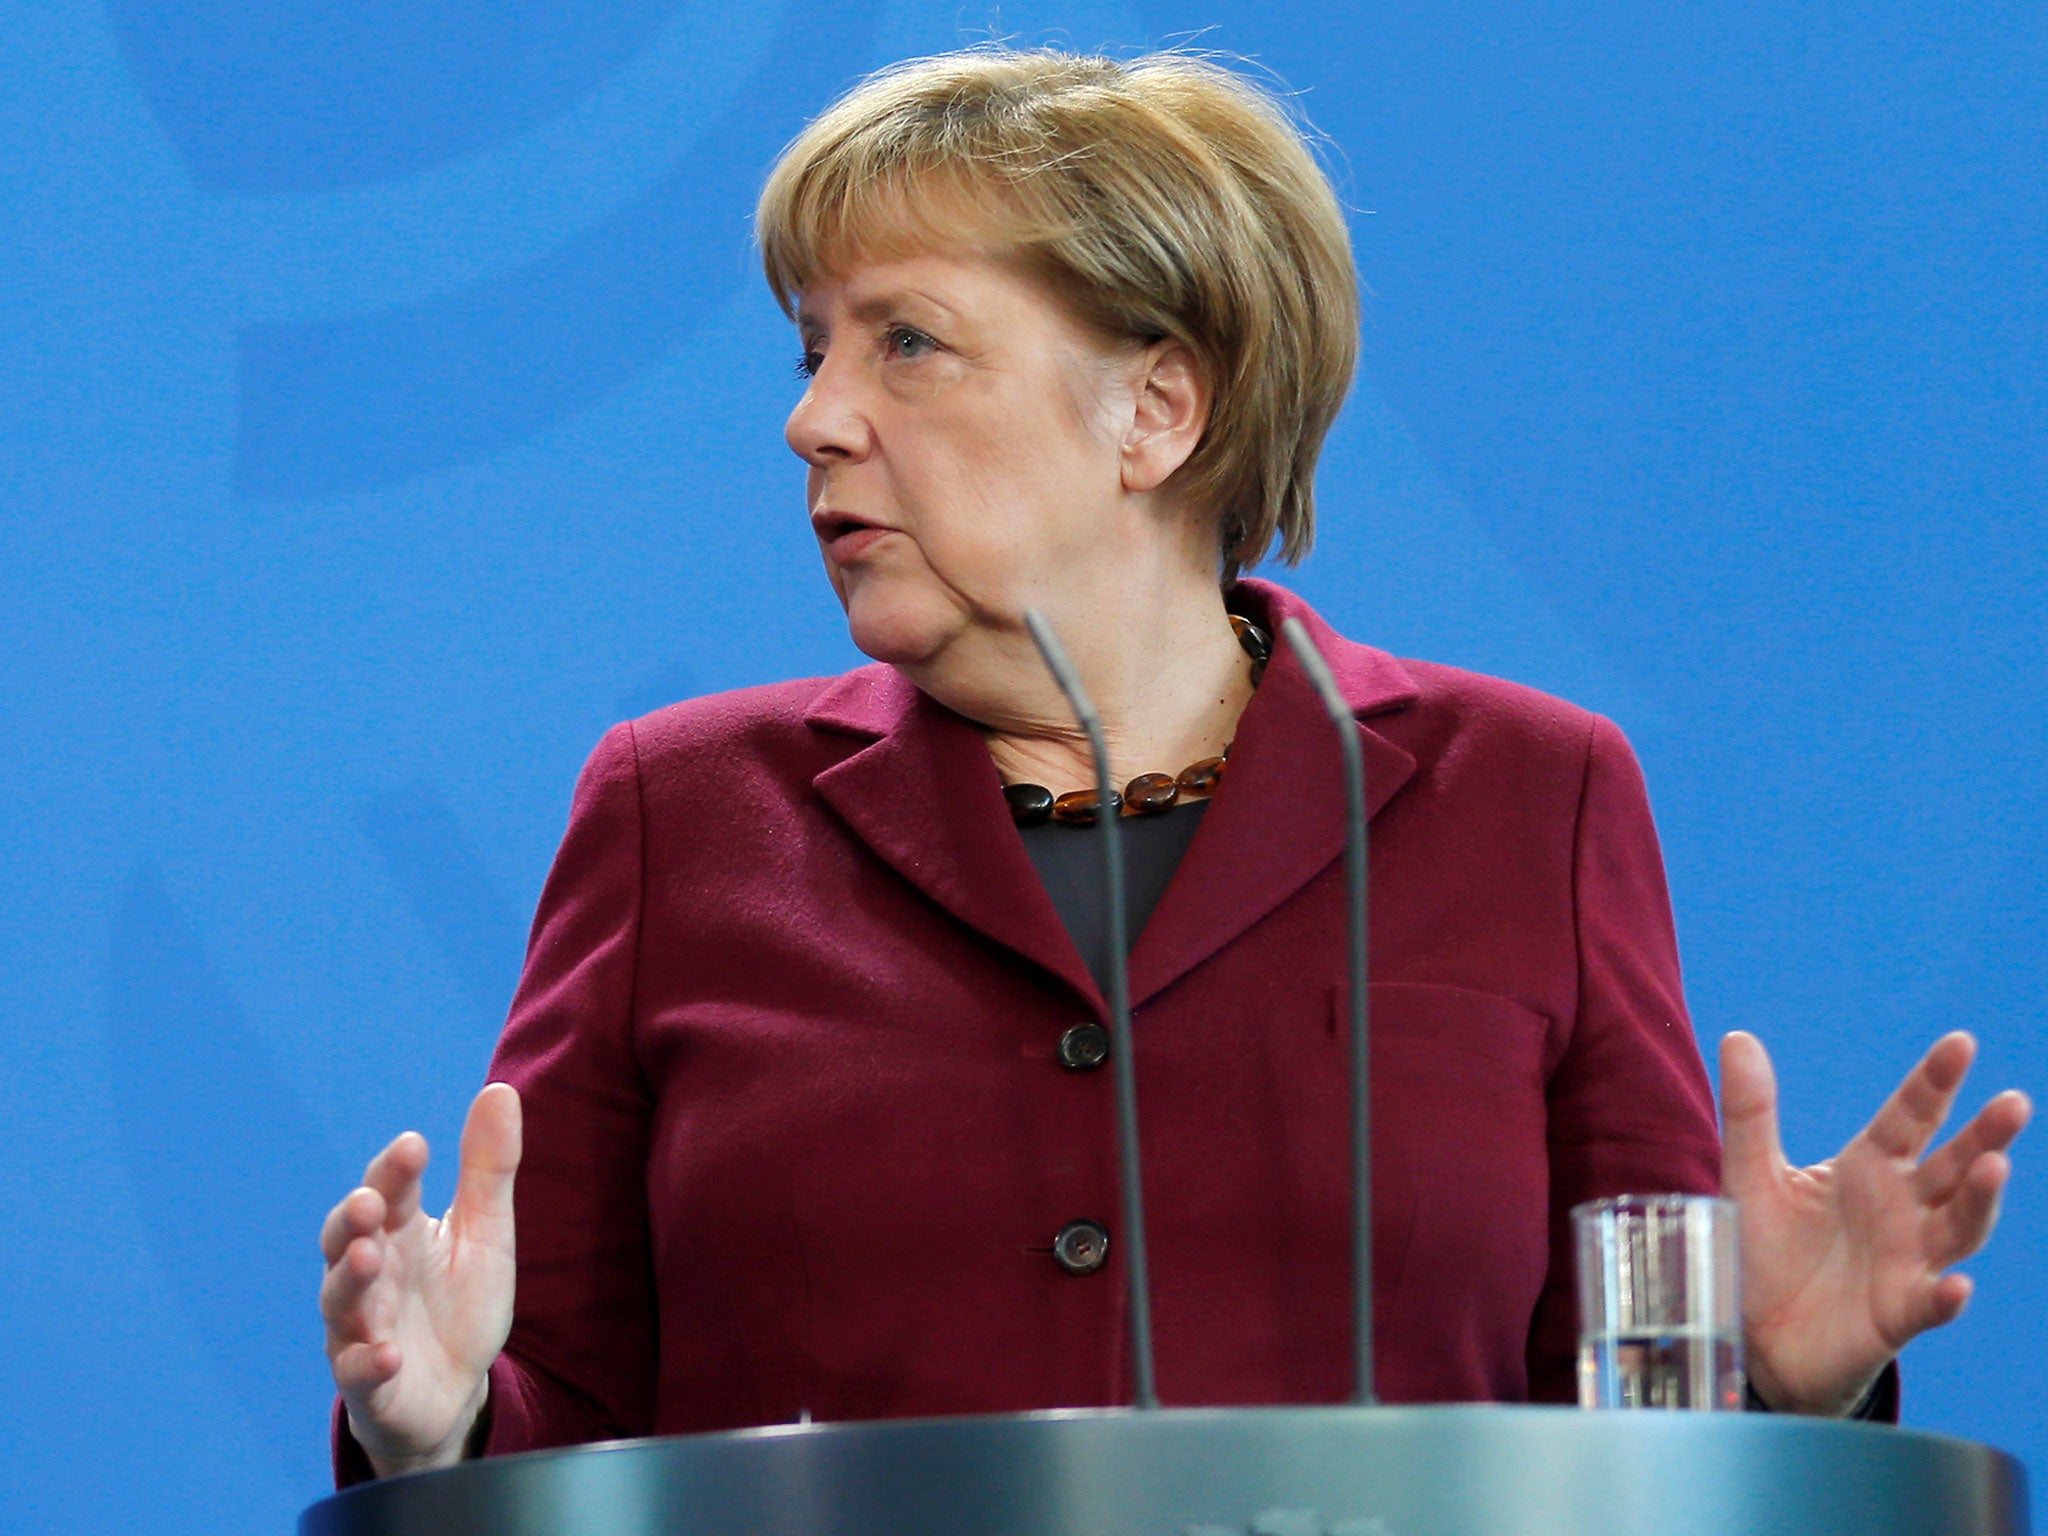 Ms Merkel has spoken about fears that next year's election could be disrupted